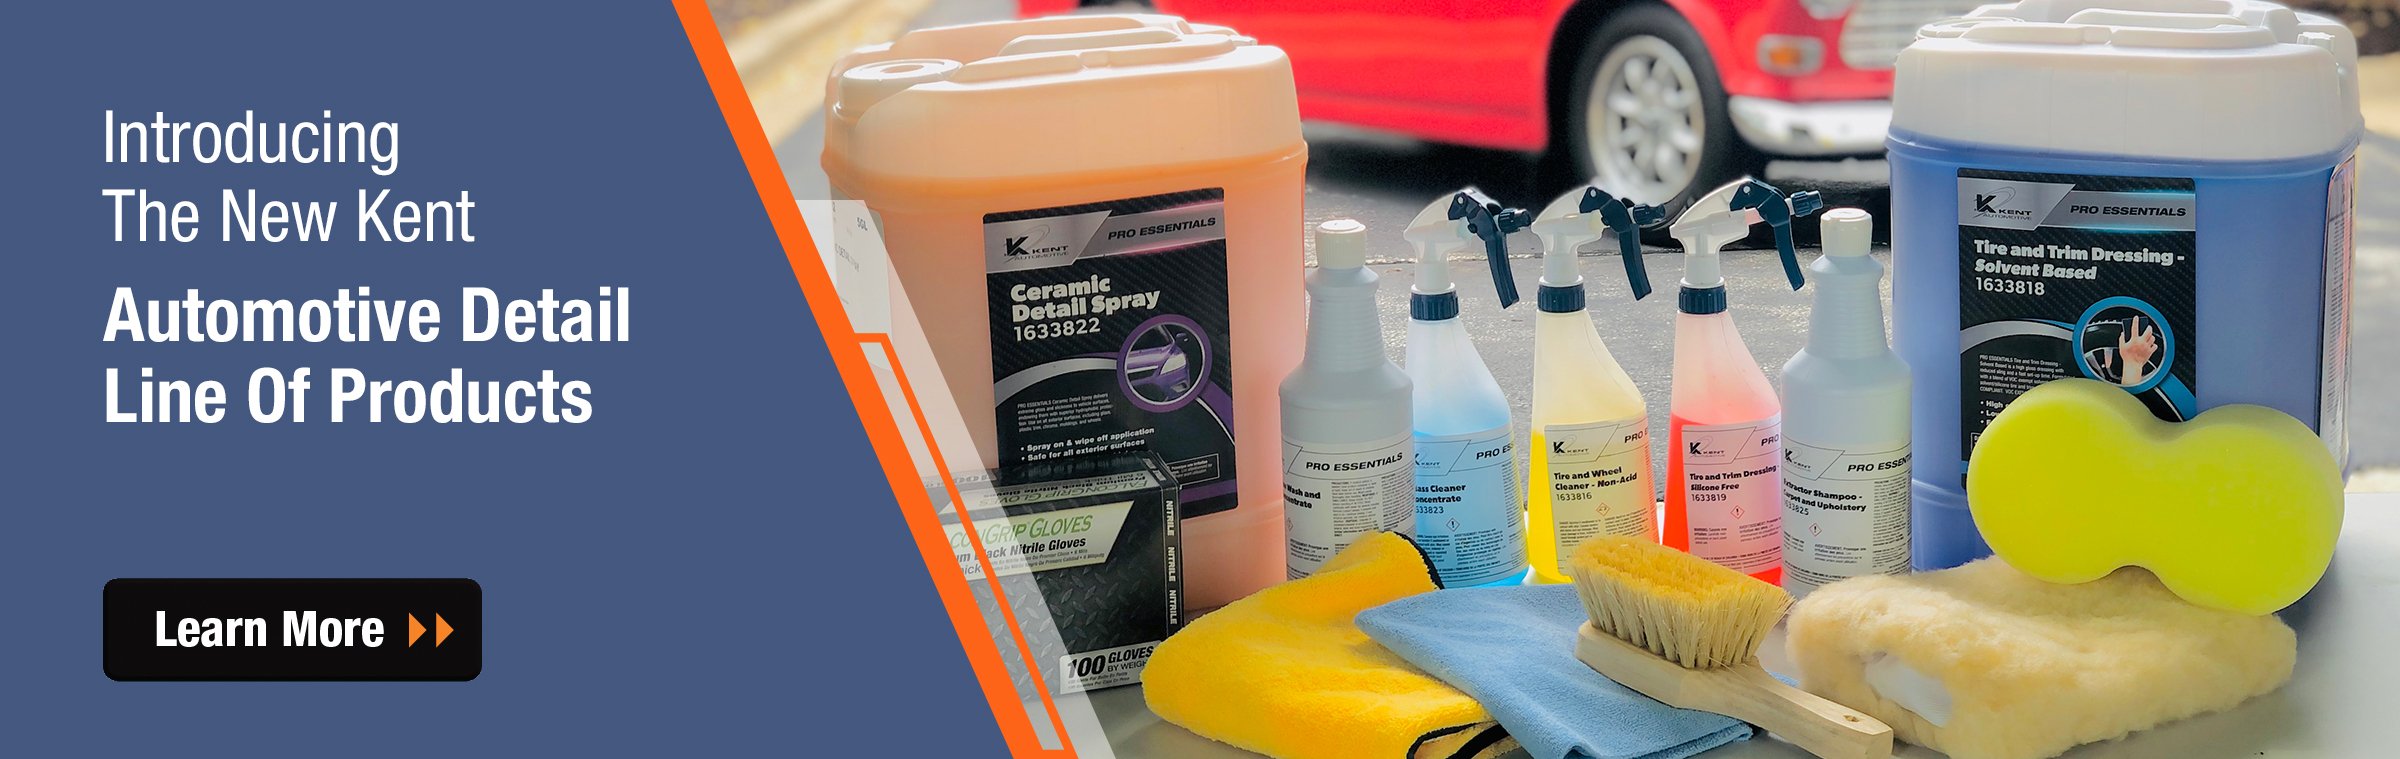 Introducing New Automotive Detail Line of Products